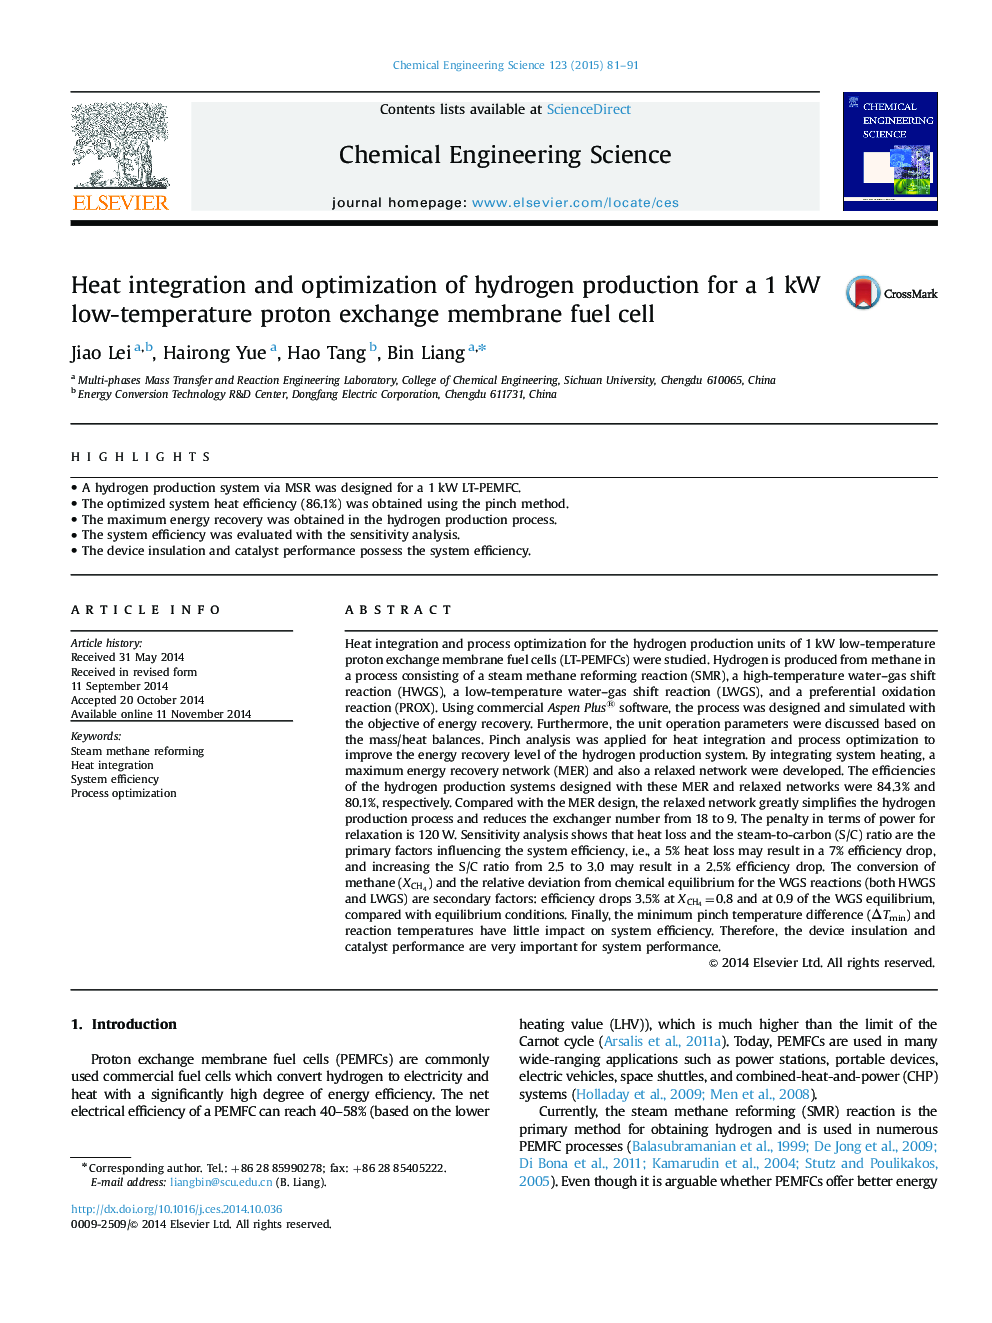 Heat integration and optimization of hydrogen production for a 1Â kW low-temperature proton exchange membrane fuel cell